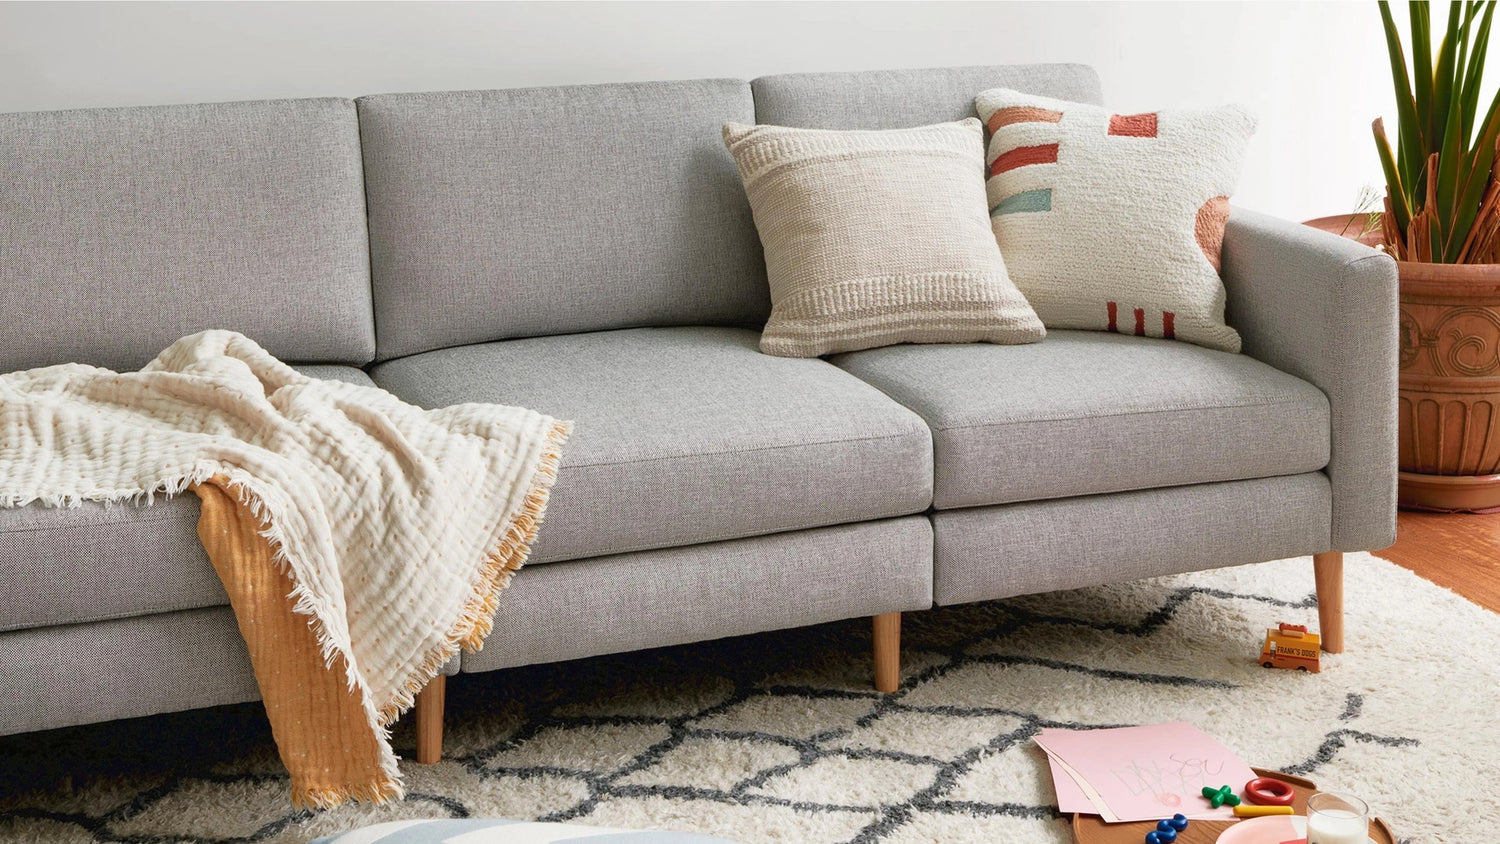 A modern gray fabric sofa is adorned with two decorative pillows and a cozy throw blanket. The couch sits on a patterned rug with geometric designs. A large potted plant is in the corner, and some children's toys and papers are scattered on the floor in the foreground.